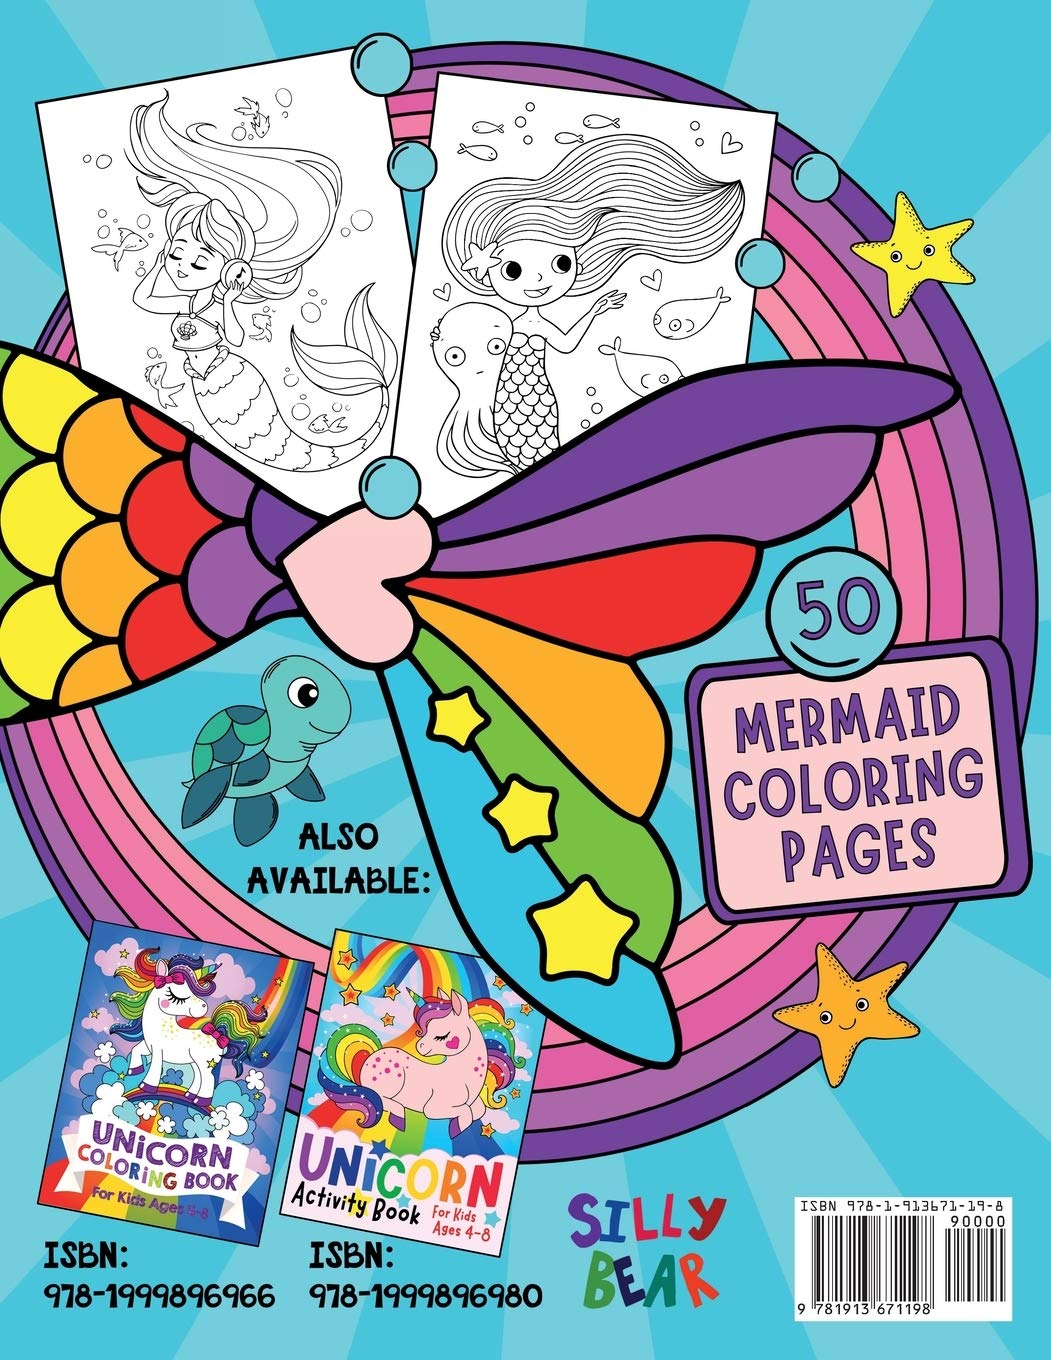 Unicorn Coloring Book For Kids Ages 4-8: Rainbow, Mermaid Coloring Books For Kids Girls Kids Coloring Book Gift [Book]